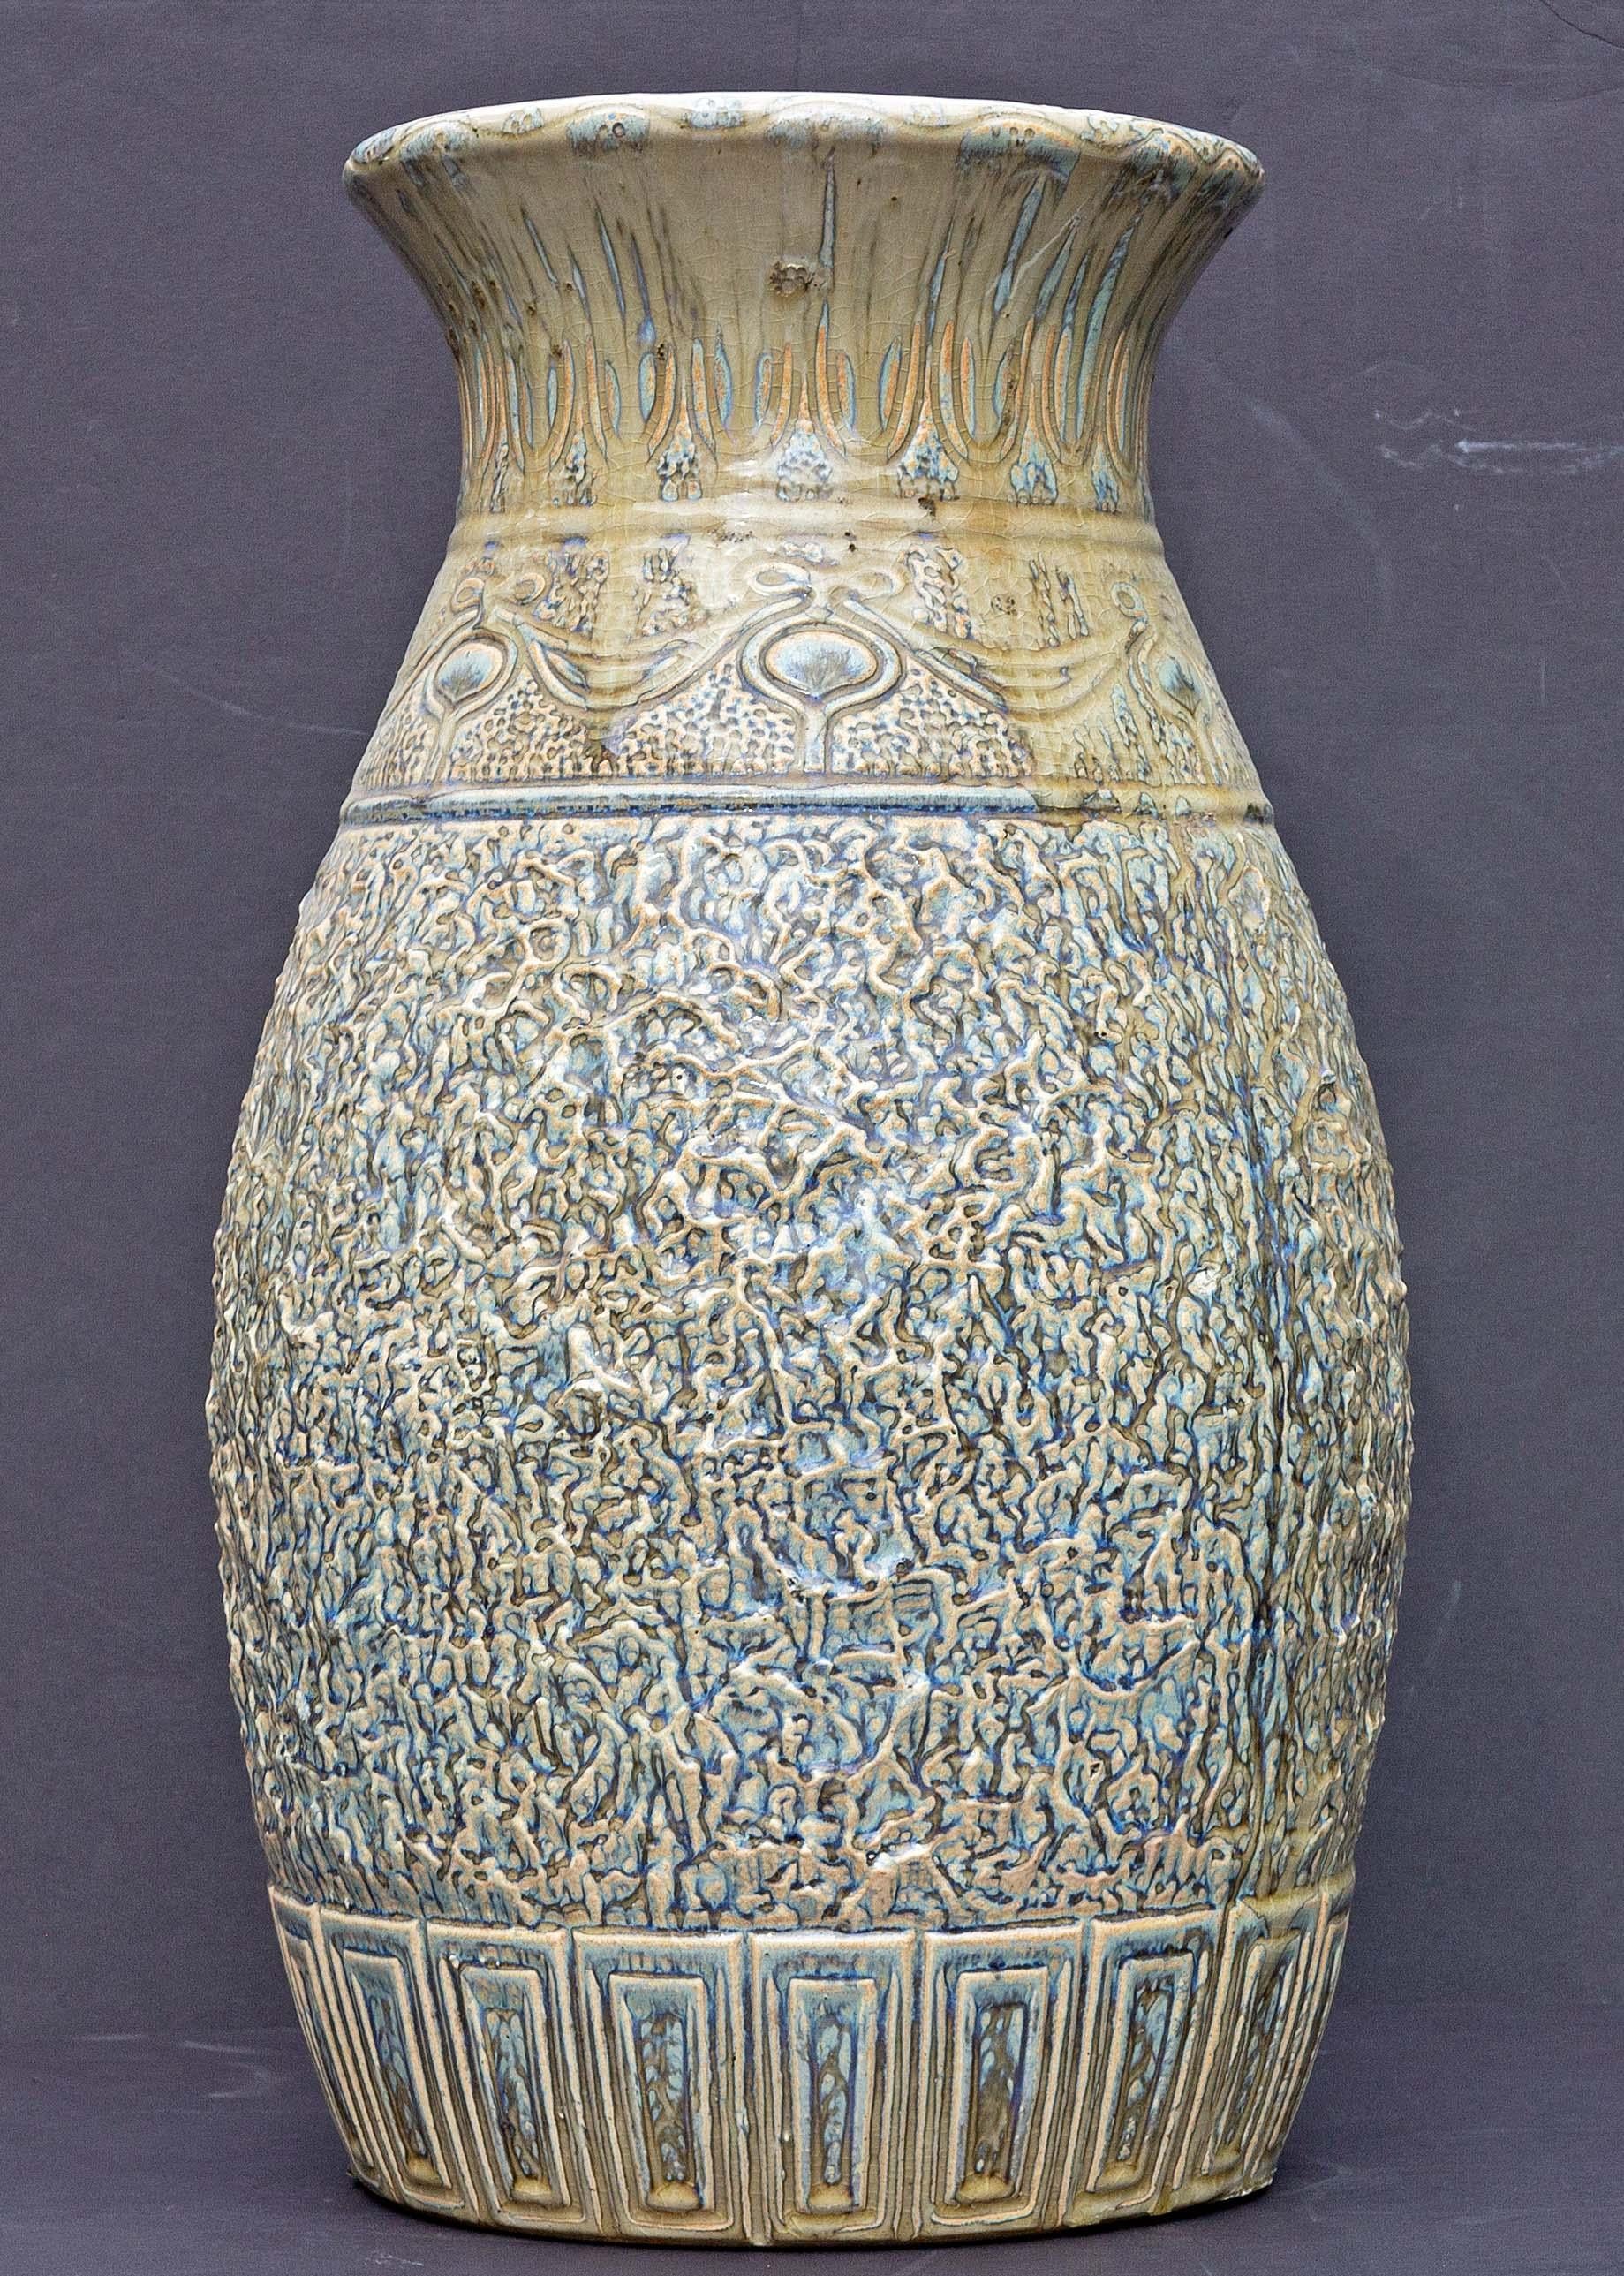 European Large Arts and Crafts Pottery Floor Vase Heavy Drip Glaze Early 20th Century For Sale